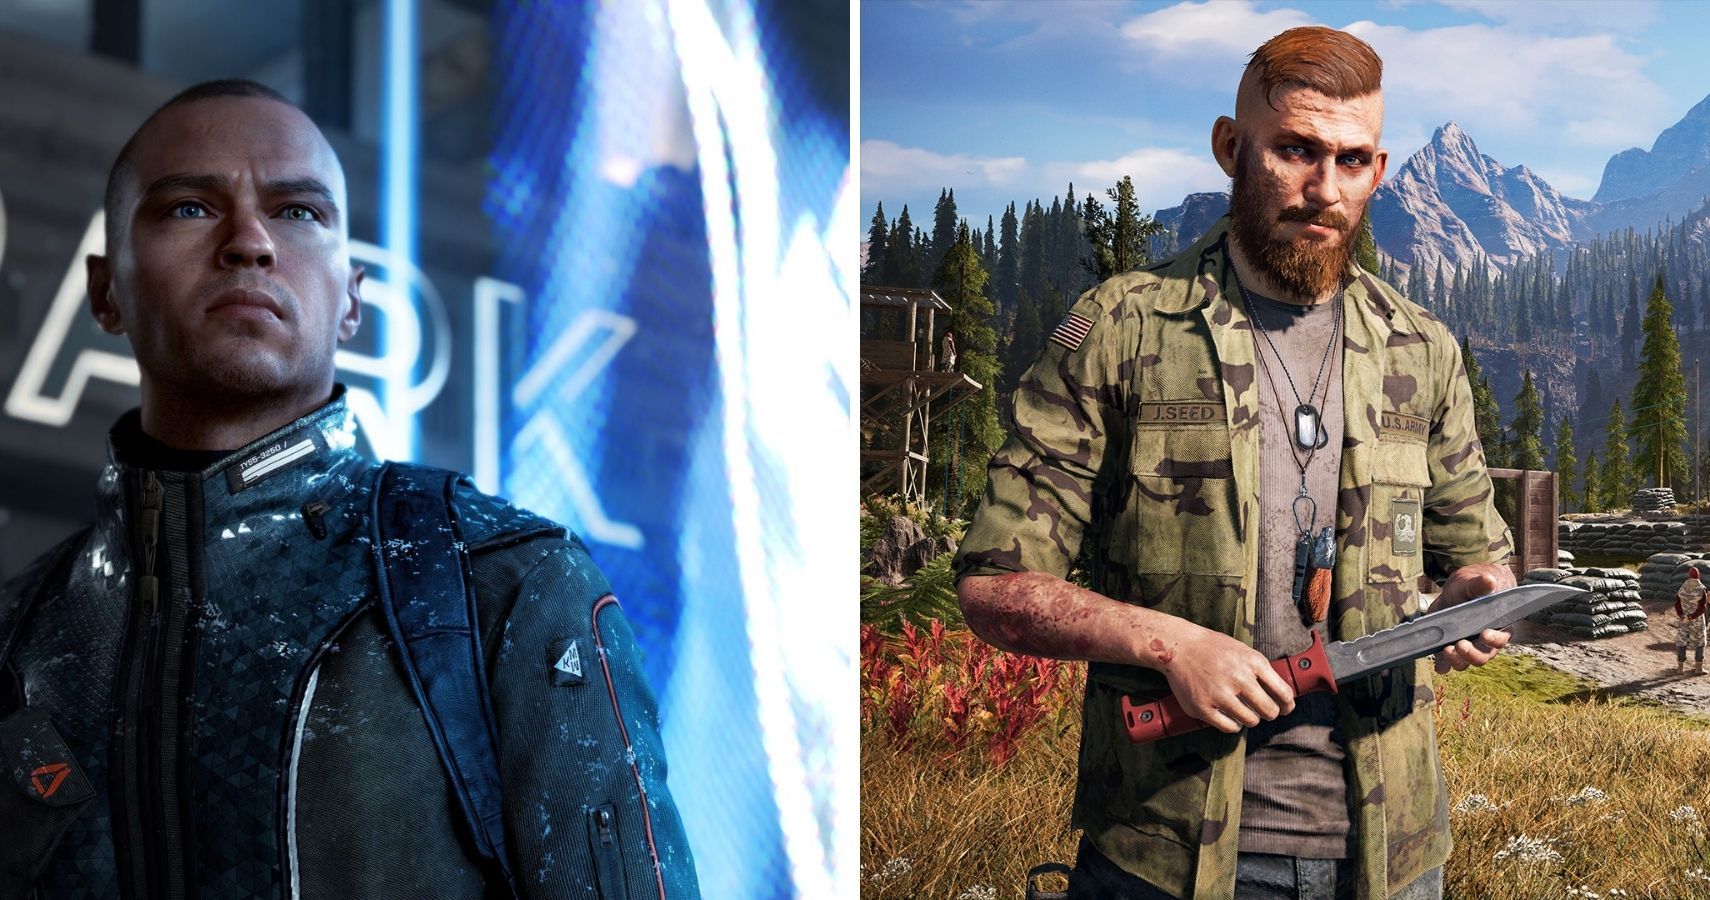 Jacob from Far Cry 5 along with Markus from Detroit Become Human. Games you can beat early on.